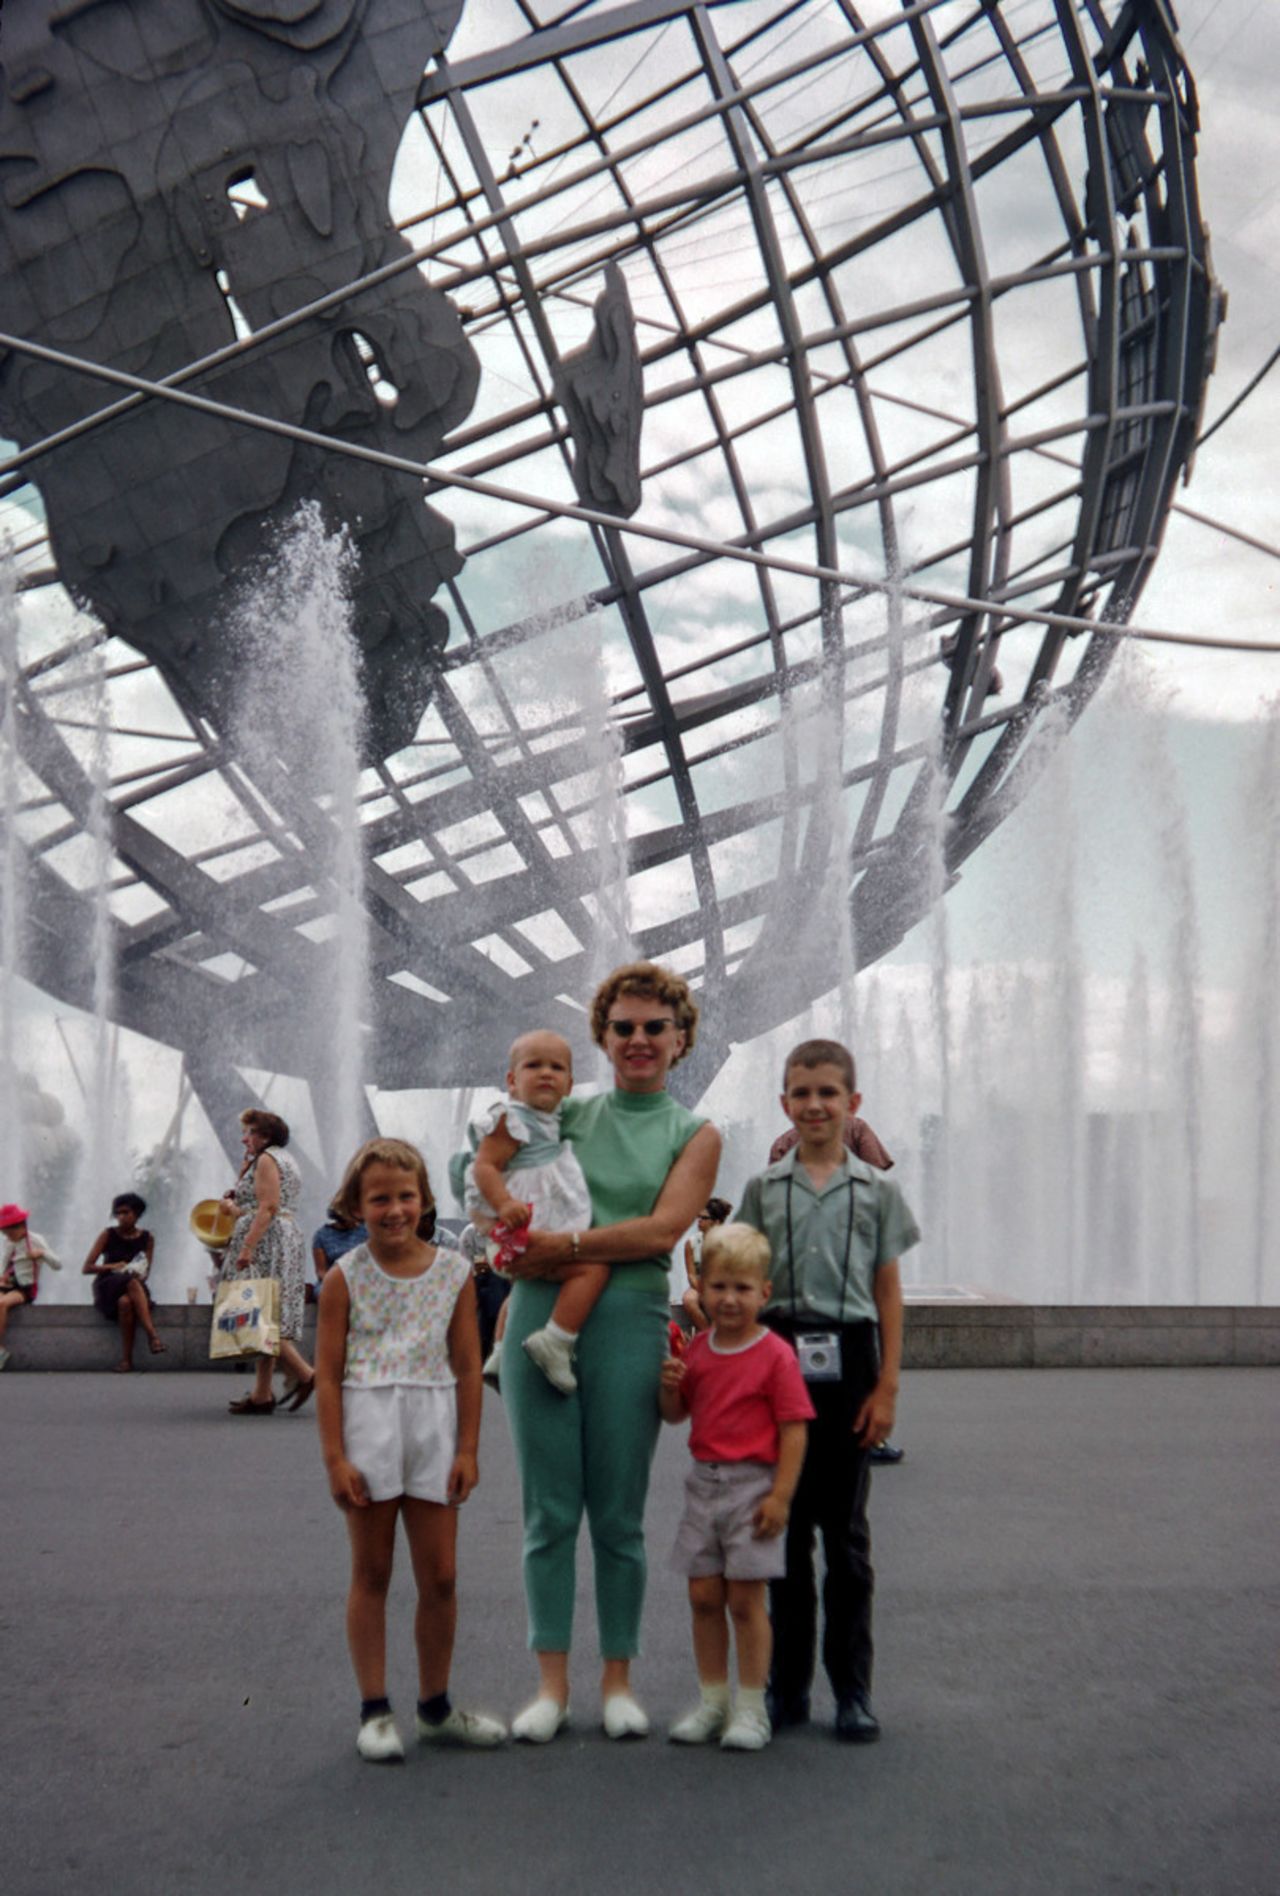 Going to the 1964 World's Fair in Queens, New York, was <a href="http://ireport.cnn.com/docs/DOC-1123630">like taking a vacation</a> for the Ondrovic family, says Robert Ondrovic. Robert is the boy with the pink shirt, standing with his mother, brother and two sisters.